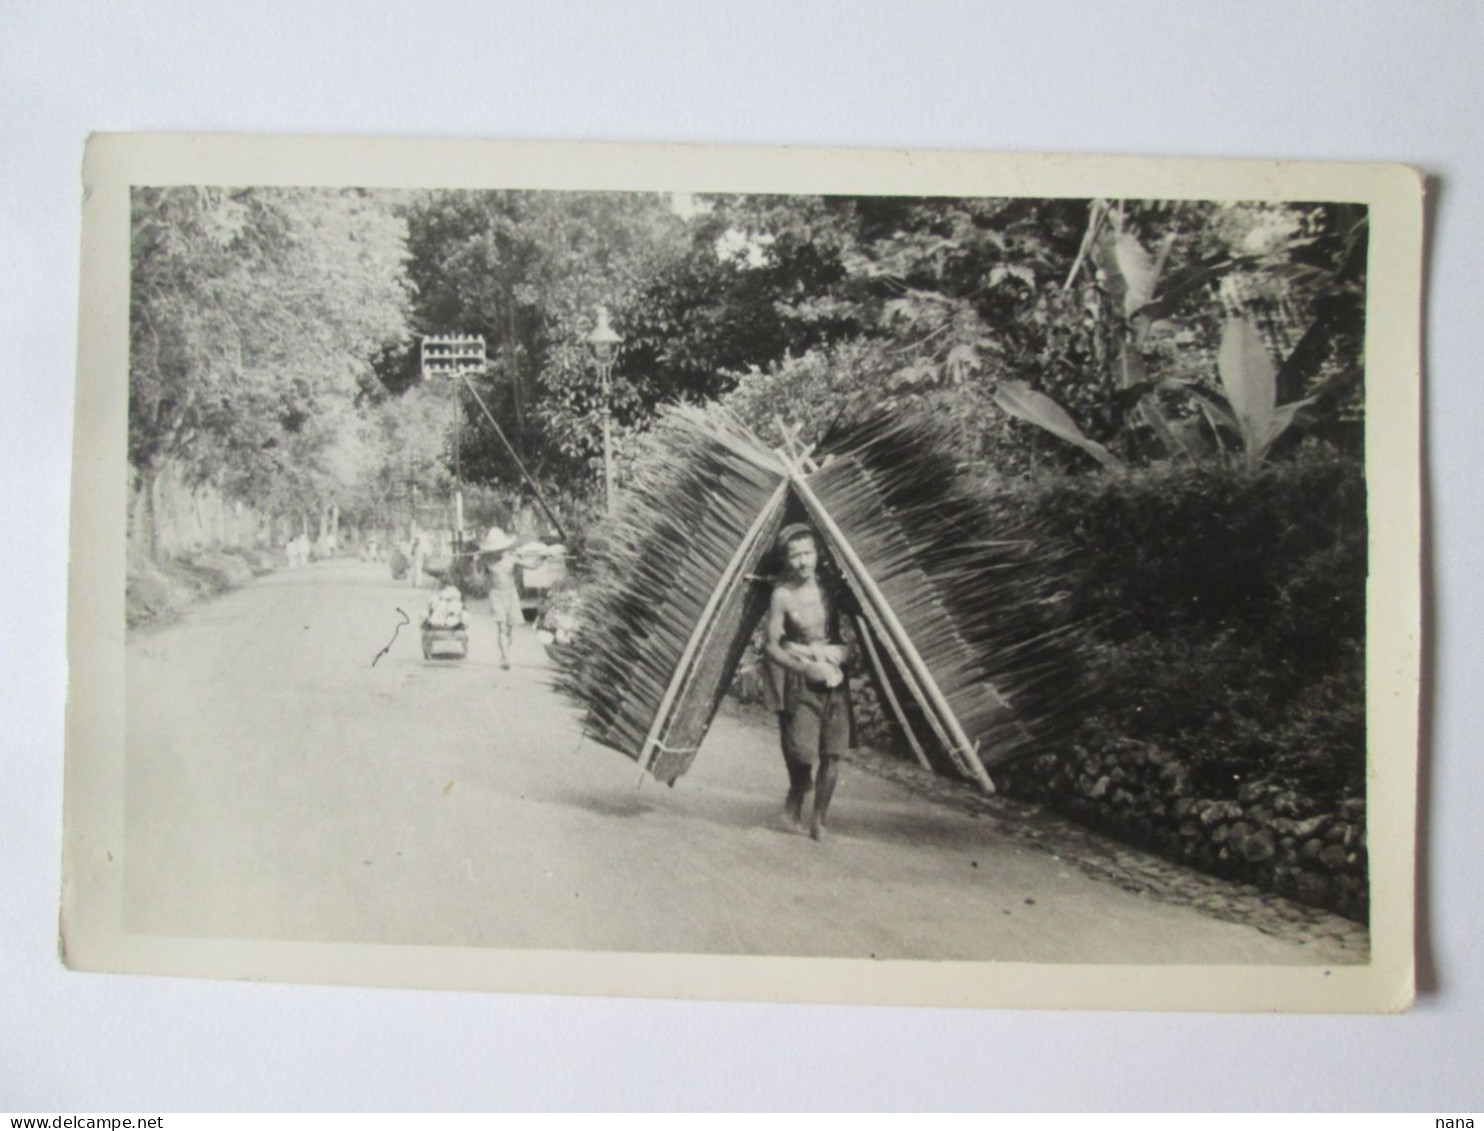 Rare! Indonesia(Bali)/Dutch East Indies:Native Seller Written Photo Postcard About 1930 - Indonesia